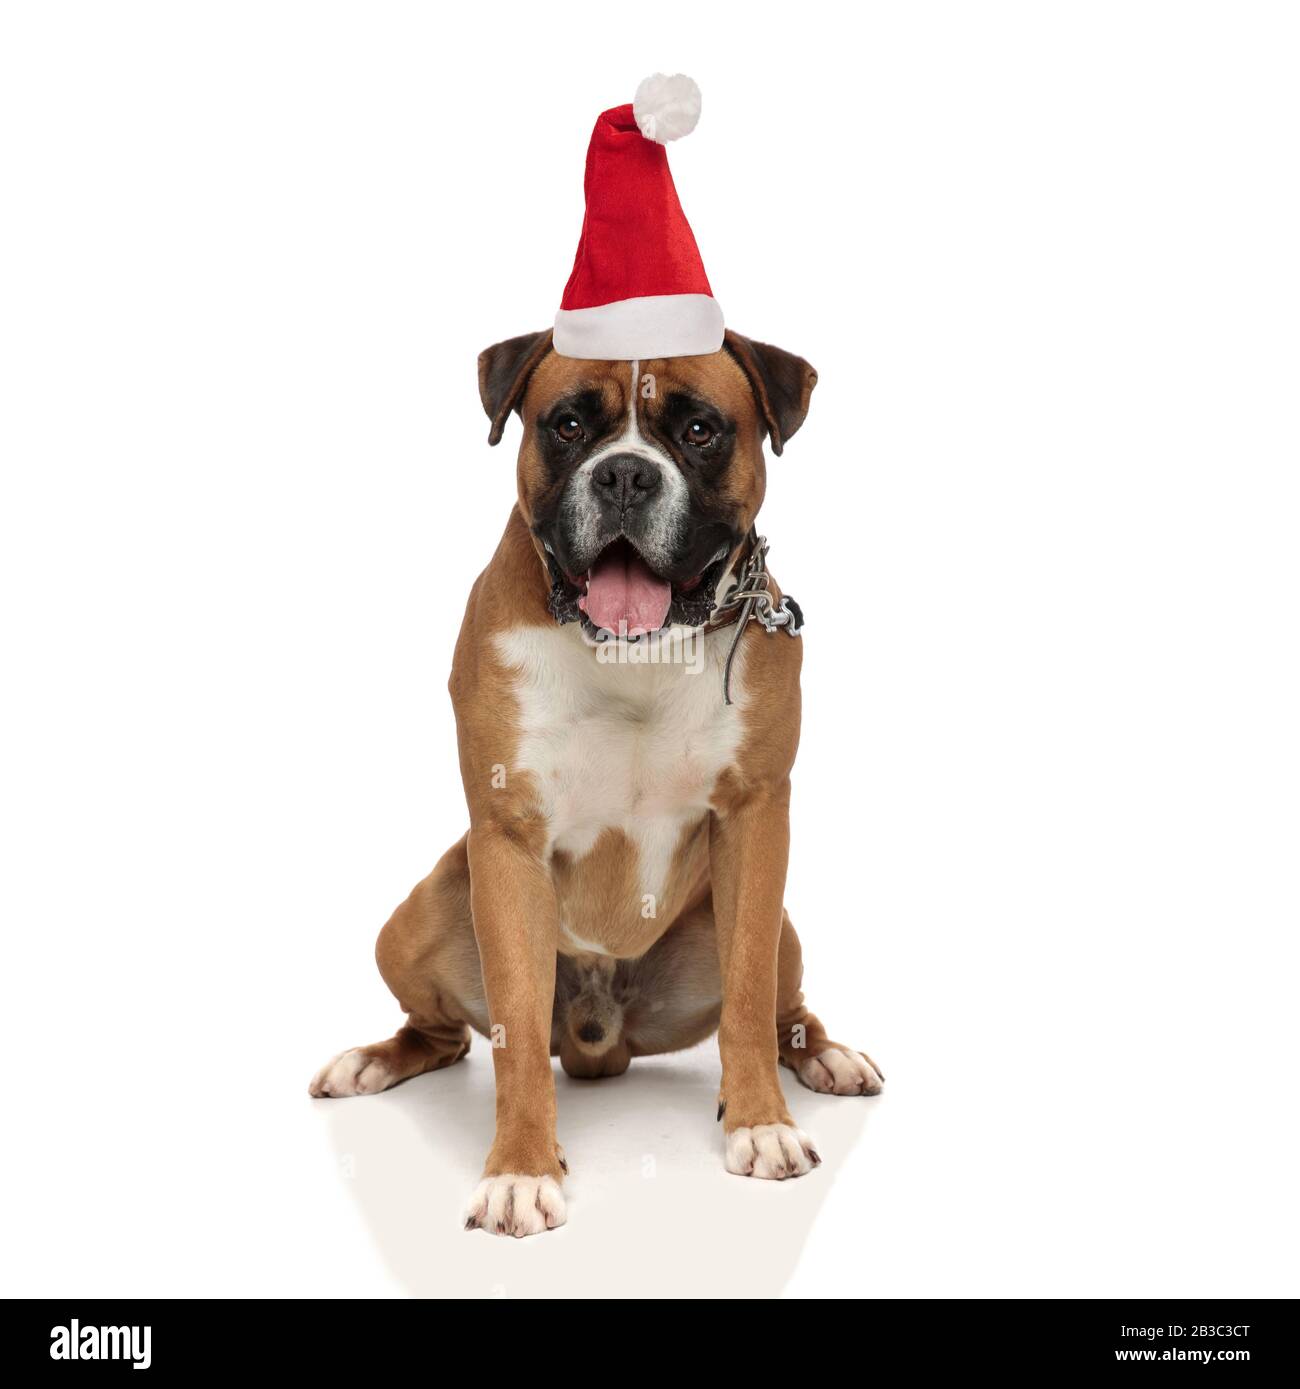 Adorable santa claus boxer puppy panting while sitting on its rear paws, looking at the camera, on a light background Stock Photo